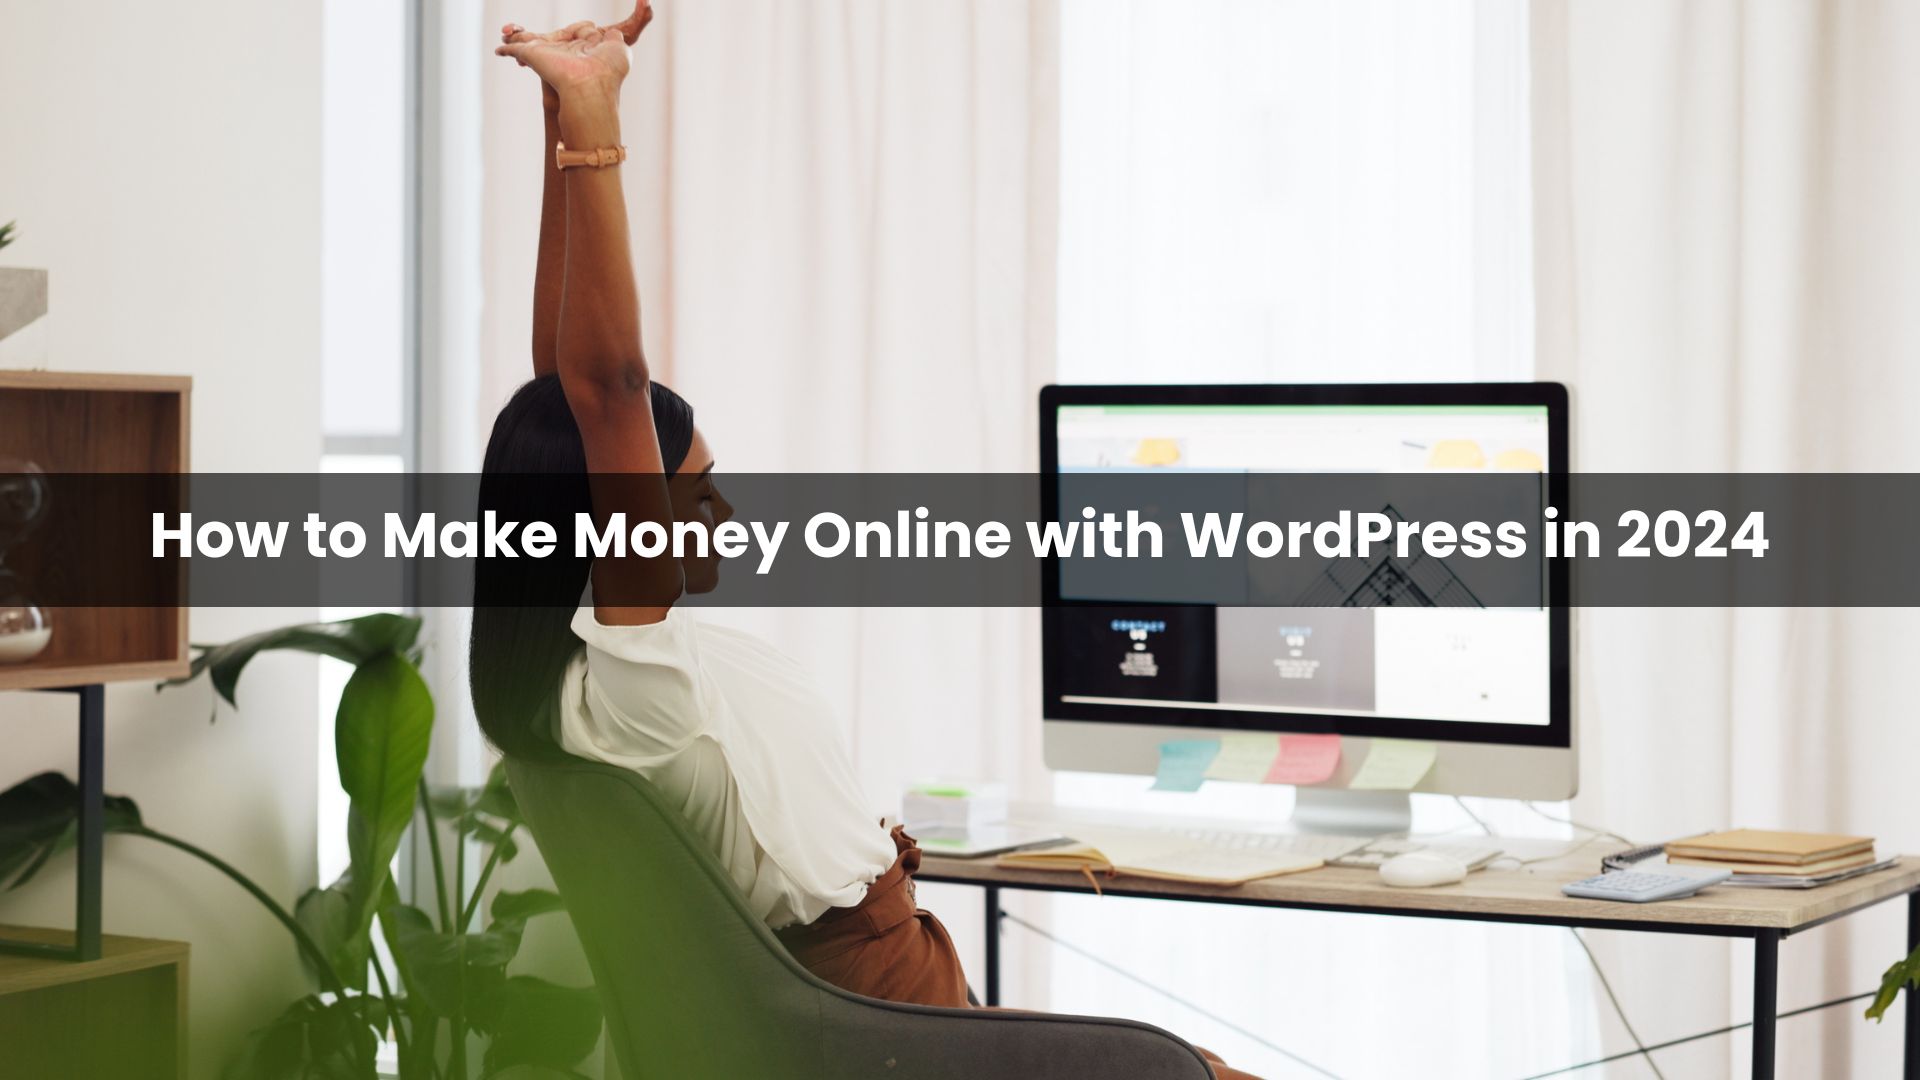 How to Make Money Online with WordPress in 2024